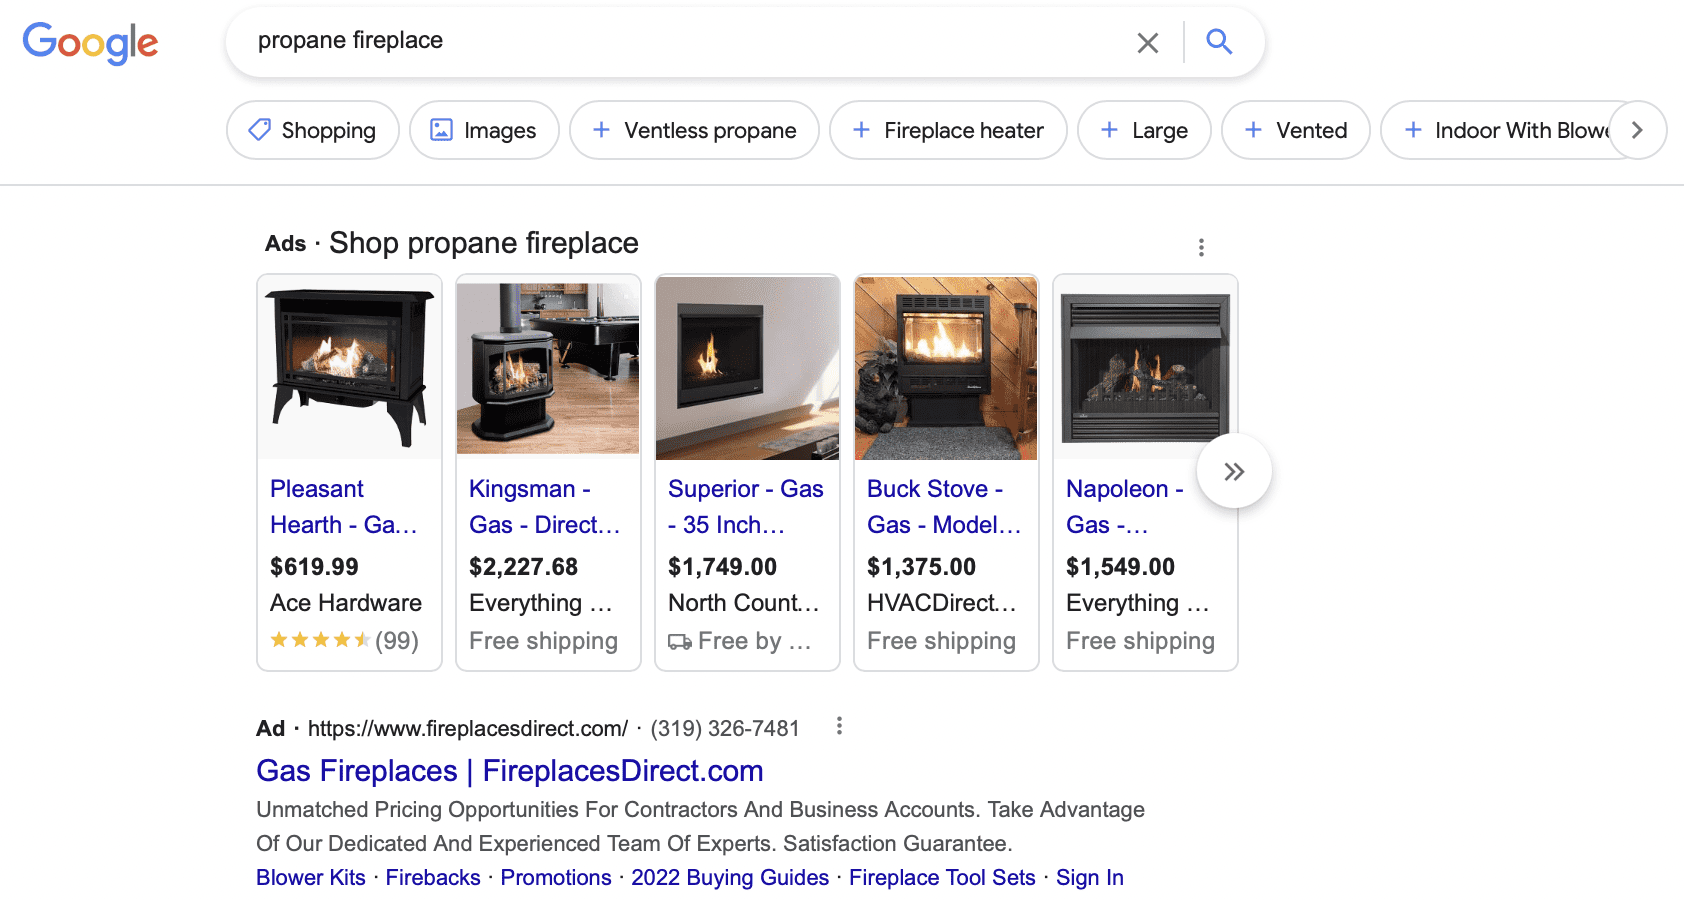 A Sample Ad for Propane Fireplace on Google SERPs